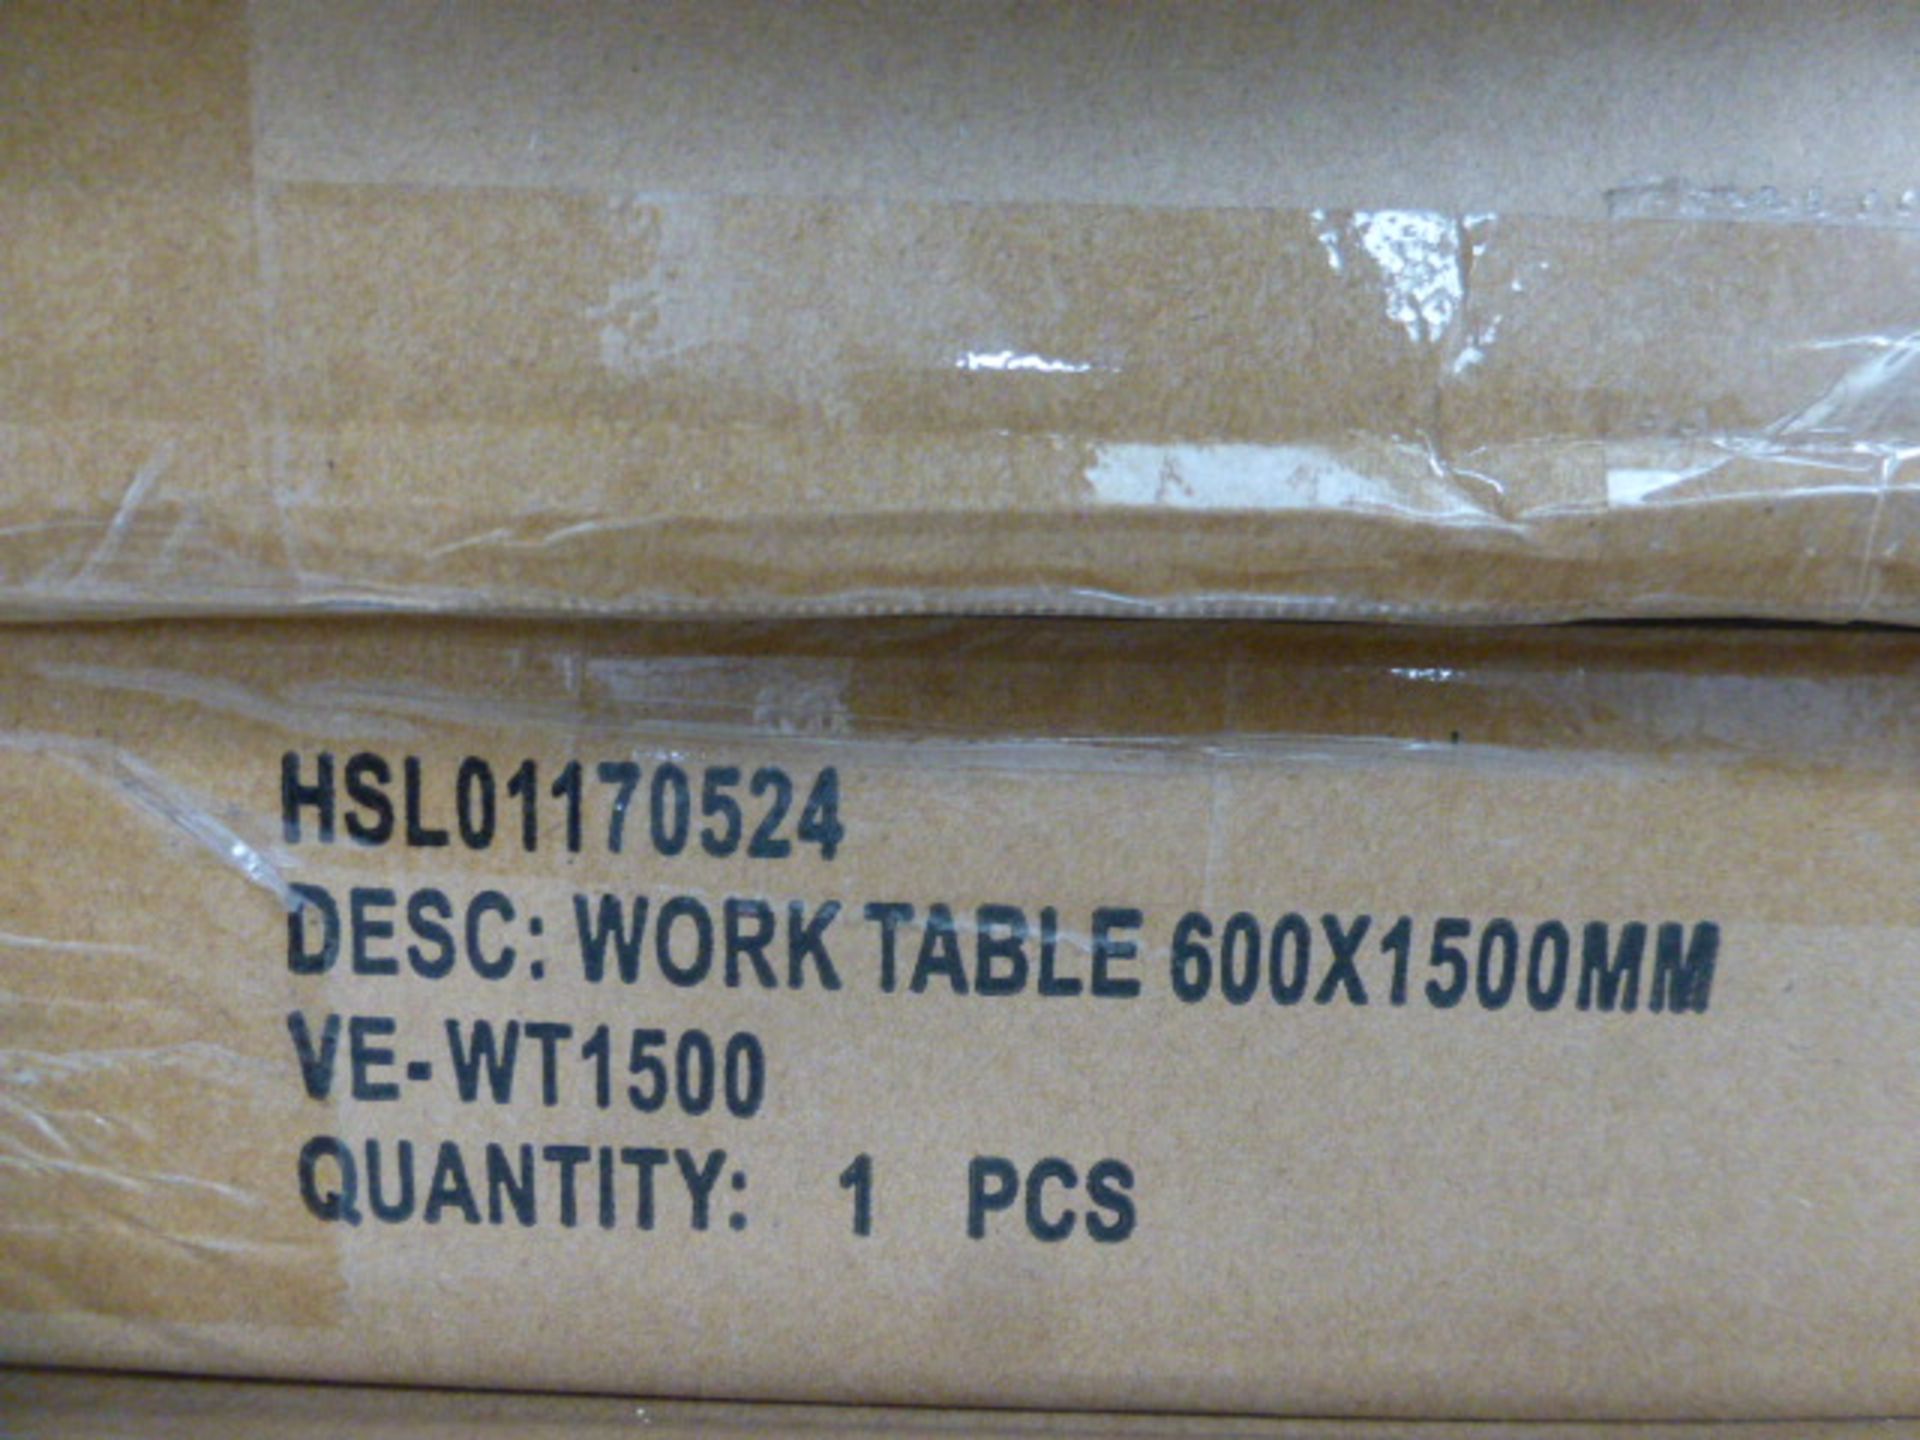 Stainless steel preparation table 60cm x 150cm (flatpack in box)